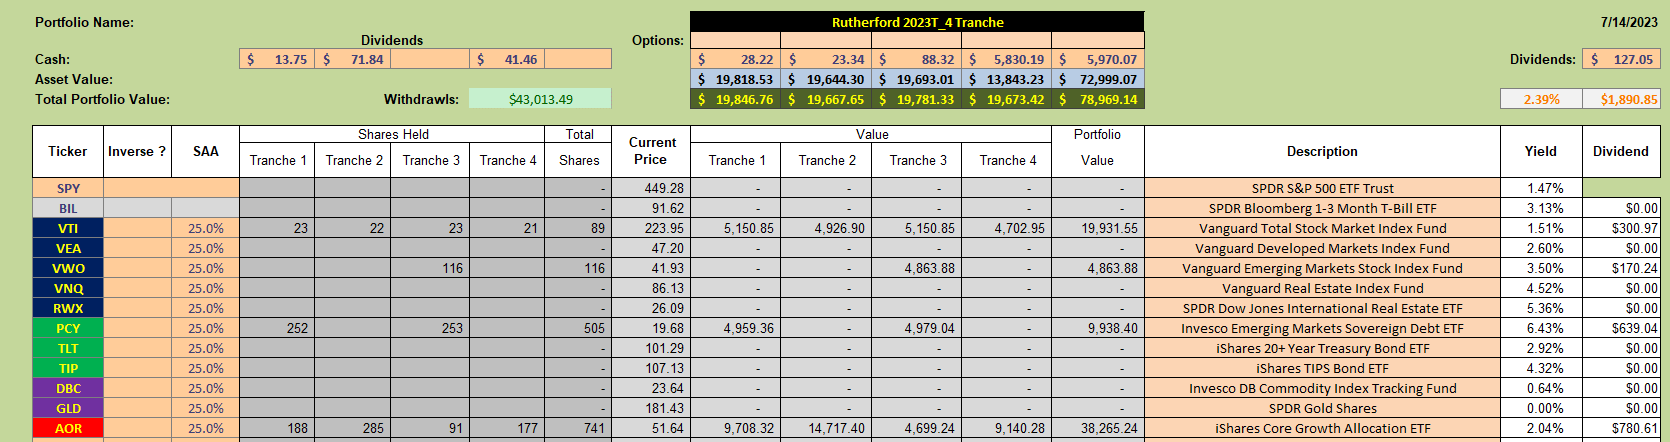 Rutherford Portfolio Review (Tranche 3): 14 July 2023 4